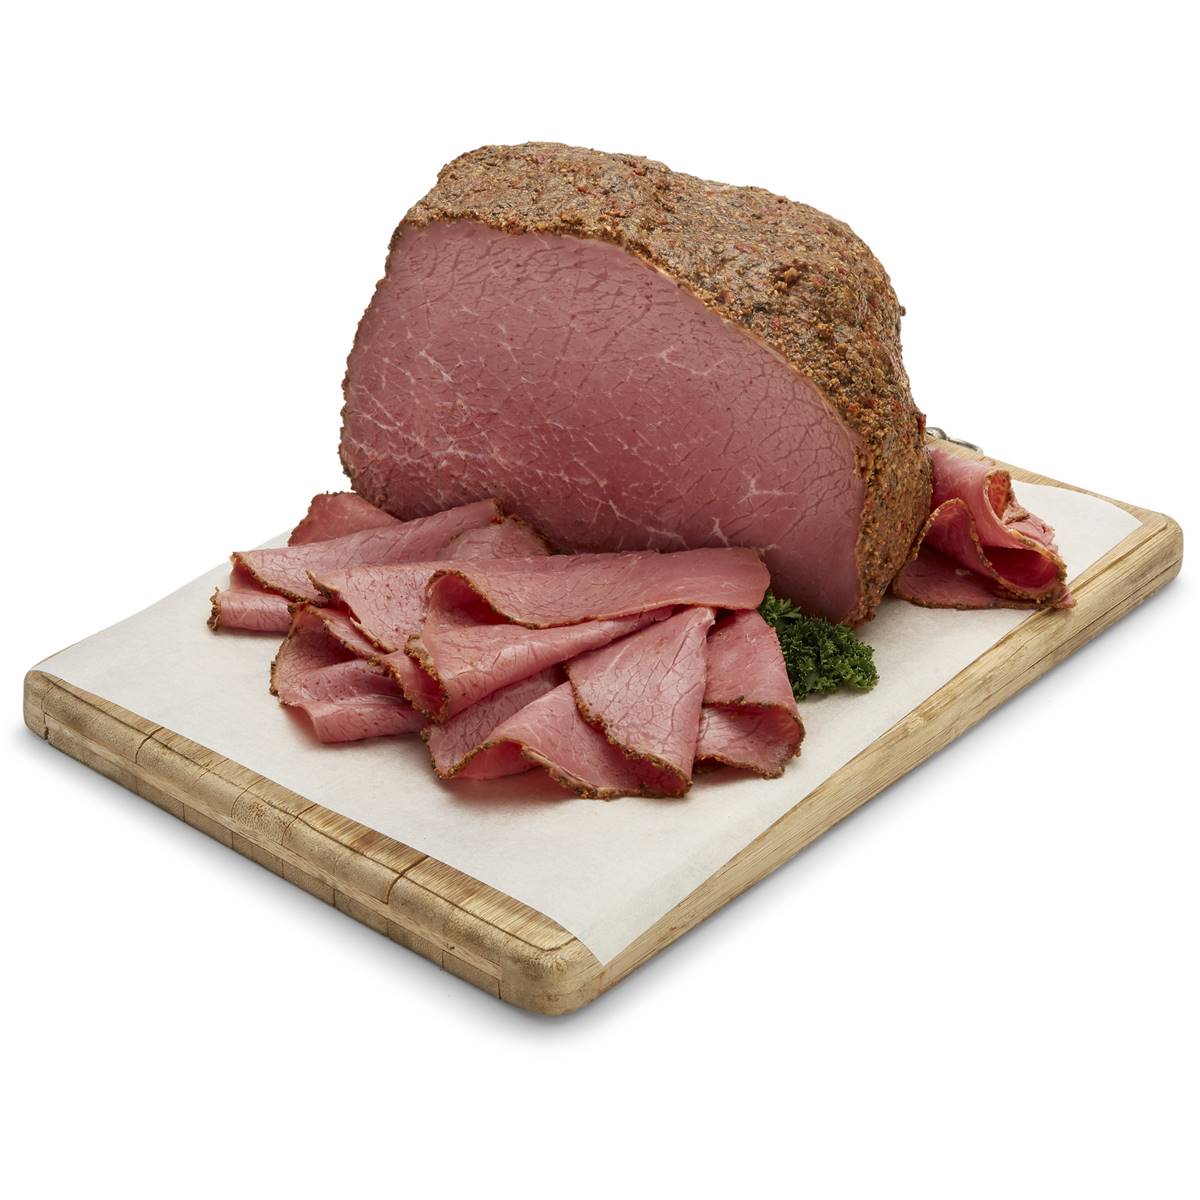 Calories in Woolworths Smoked Beef Pastrami Freshly Sliced From The Deli